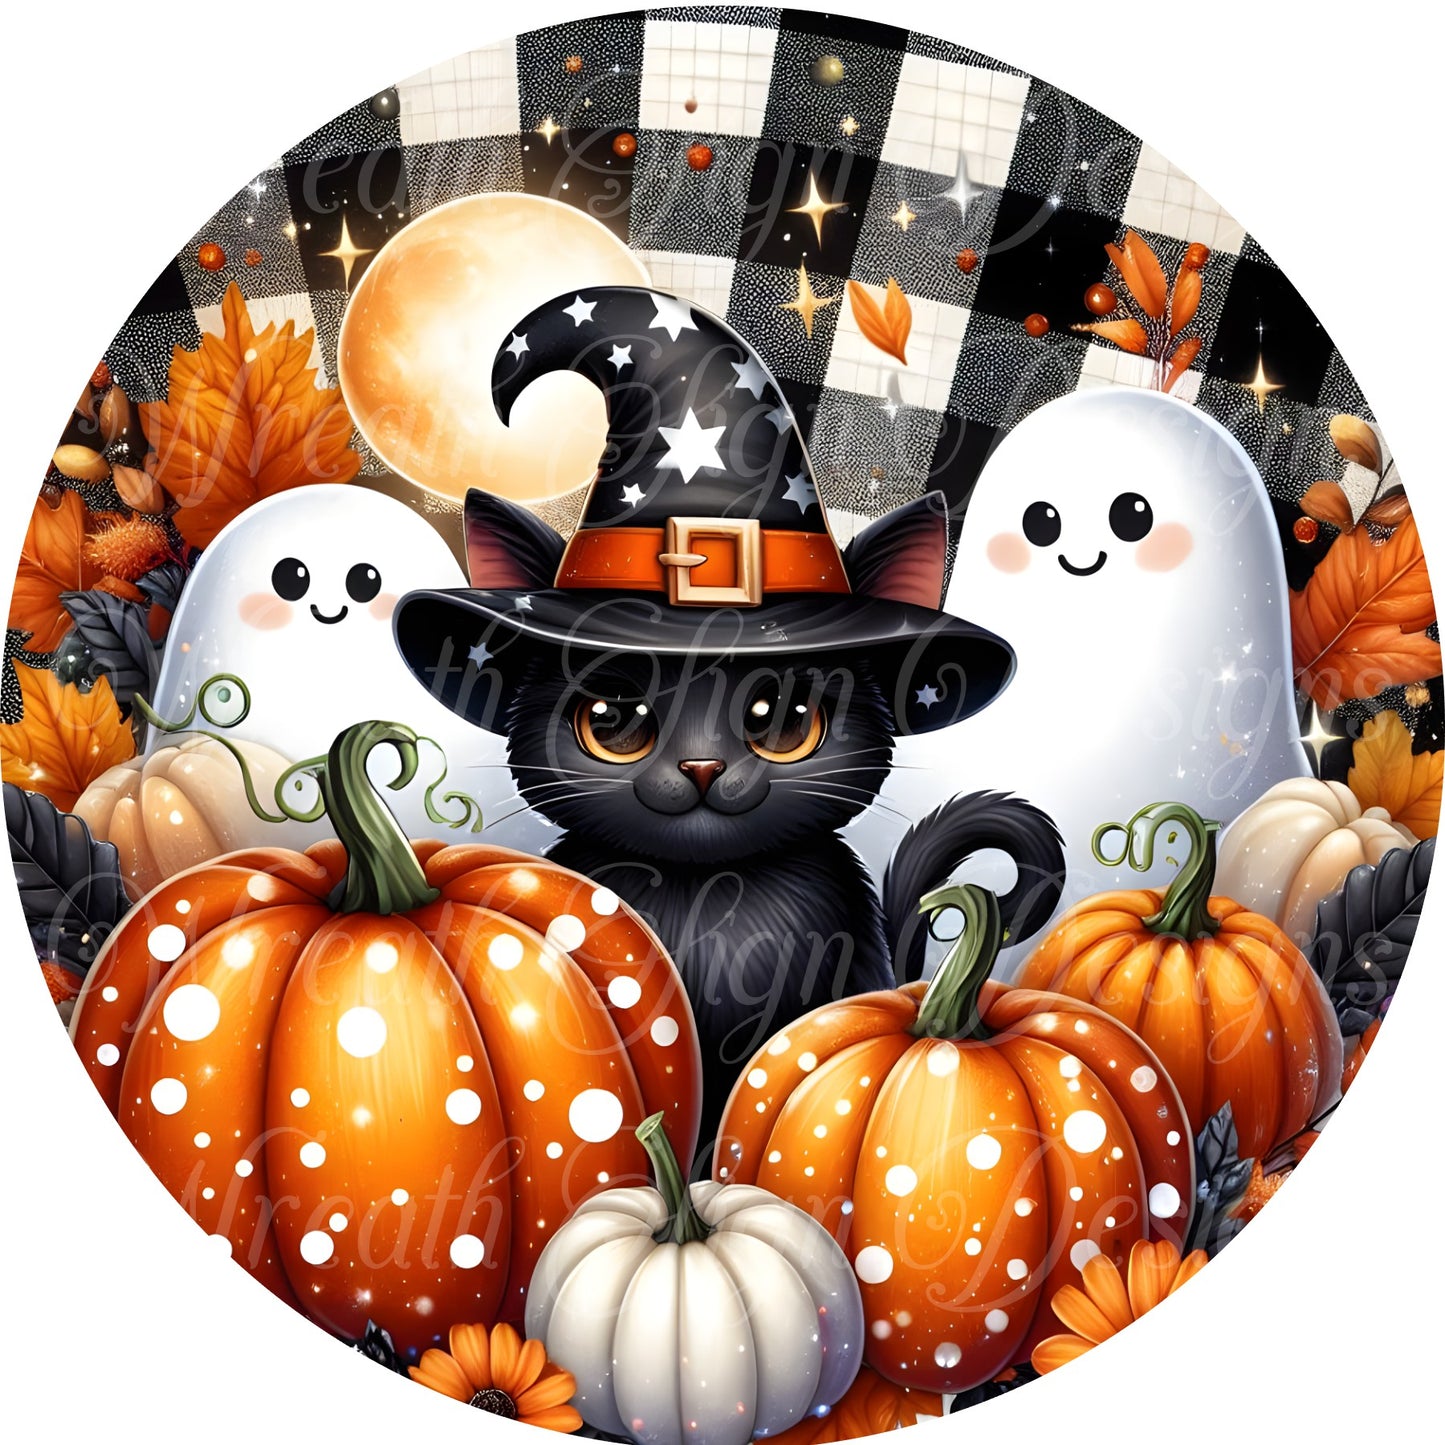 Fall sign, Halloween sign, Black cat in a witch ha with pumpkins and ghost round metal wreath sign, wreth center, wreath attachment